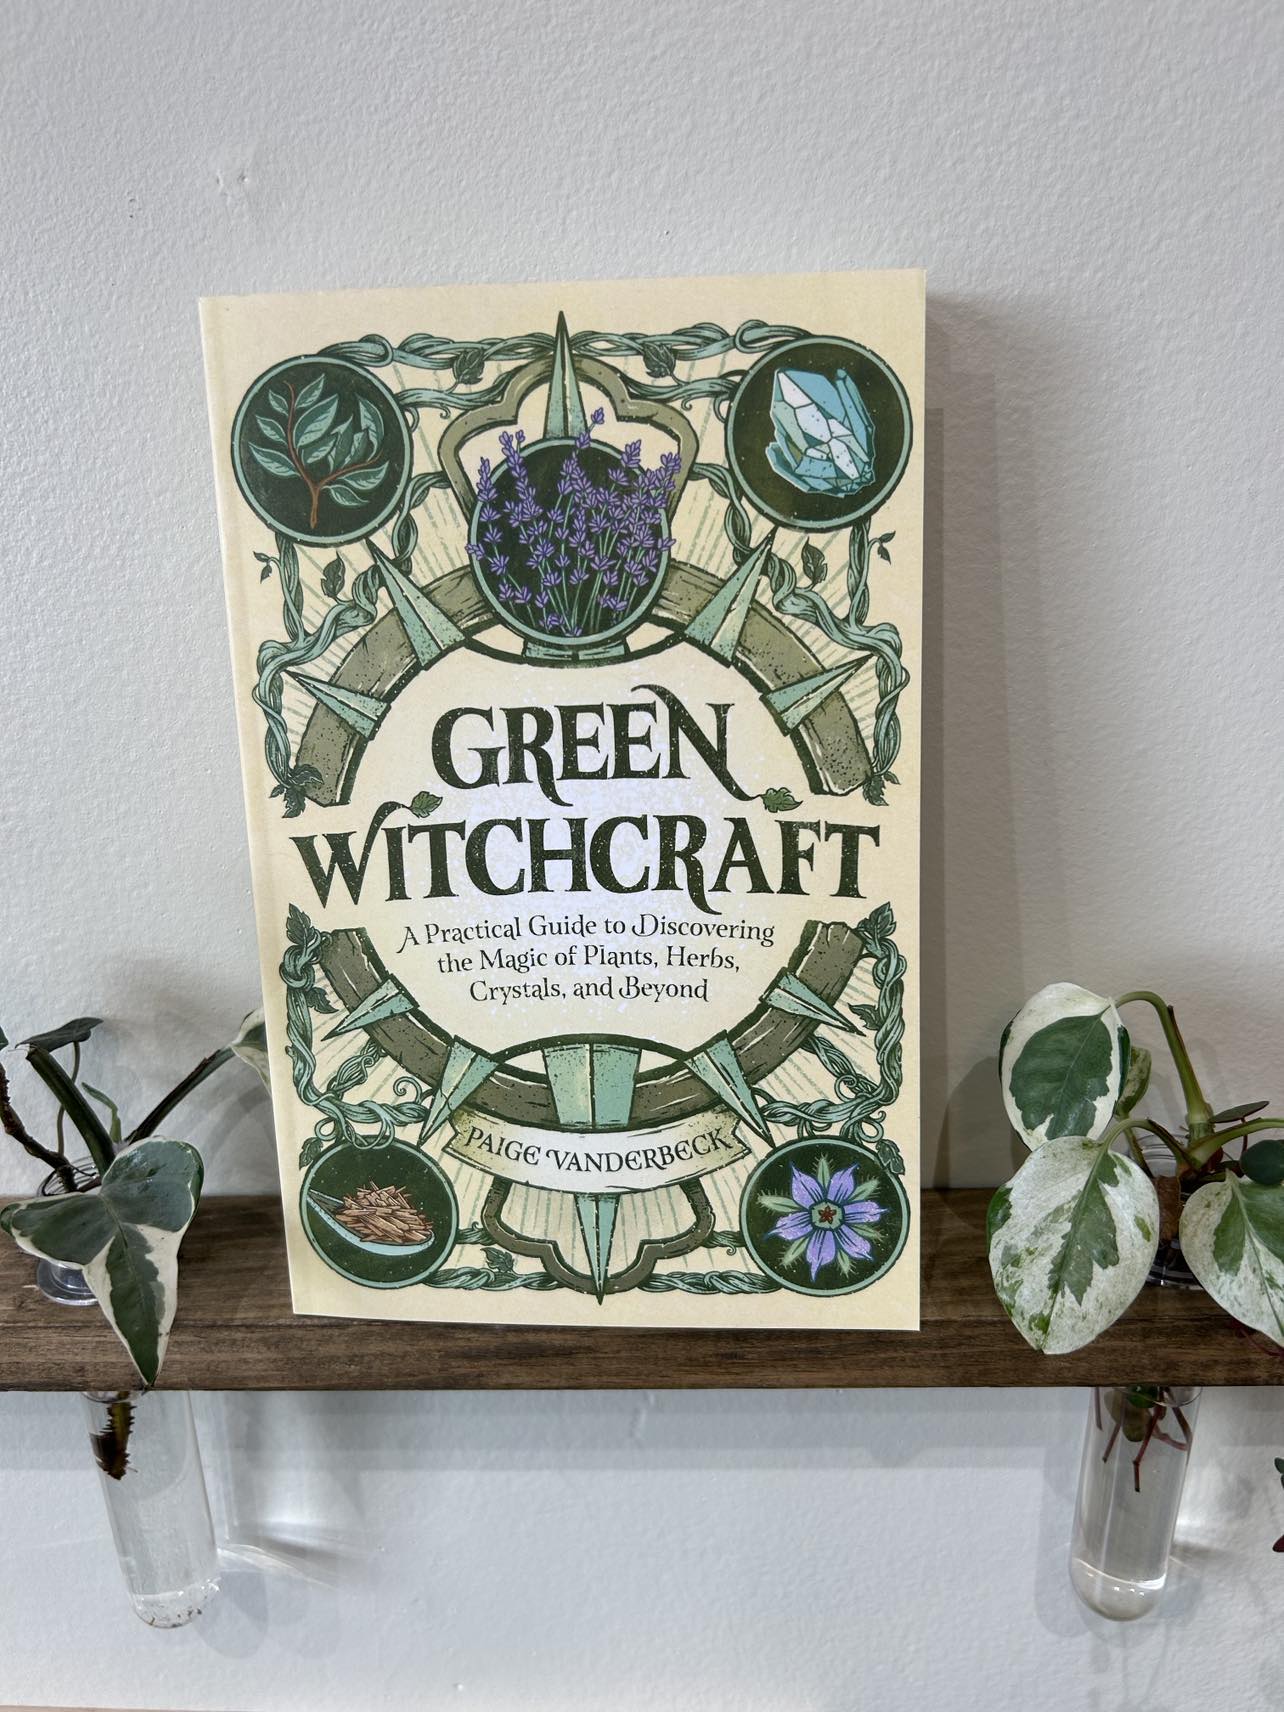 The green Witchcraft by Paige Vanderbeck